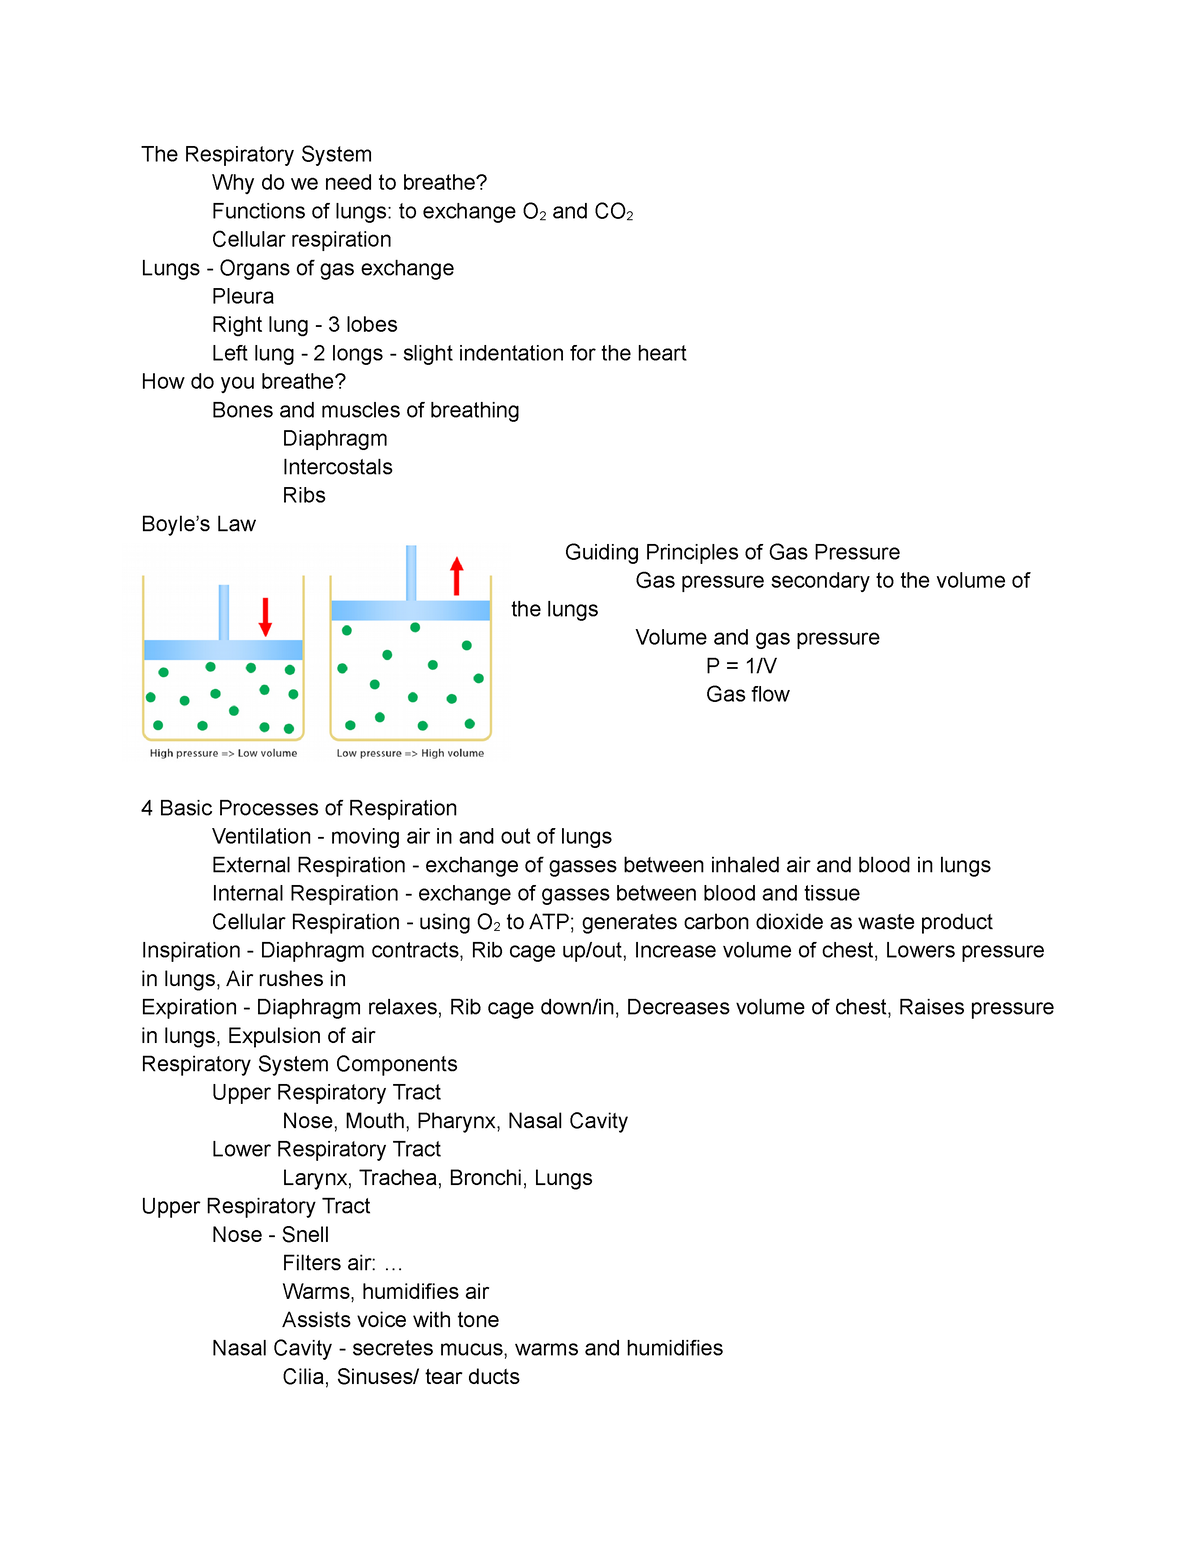 Chapter 10 Notes - Dr. Cheifri, Respiratory System, Lungs, Gas Exchange ...